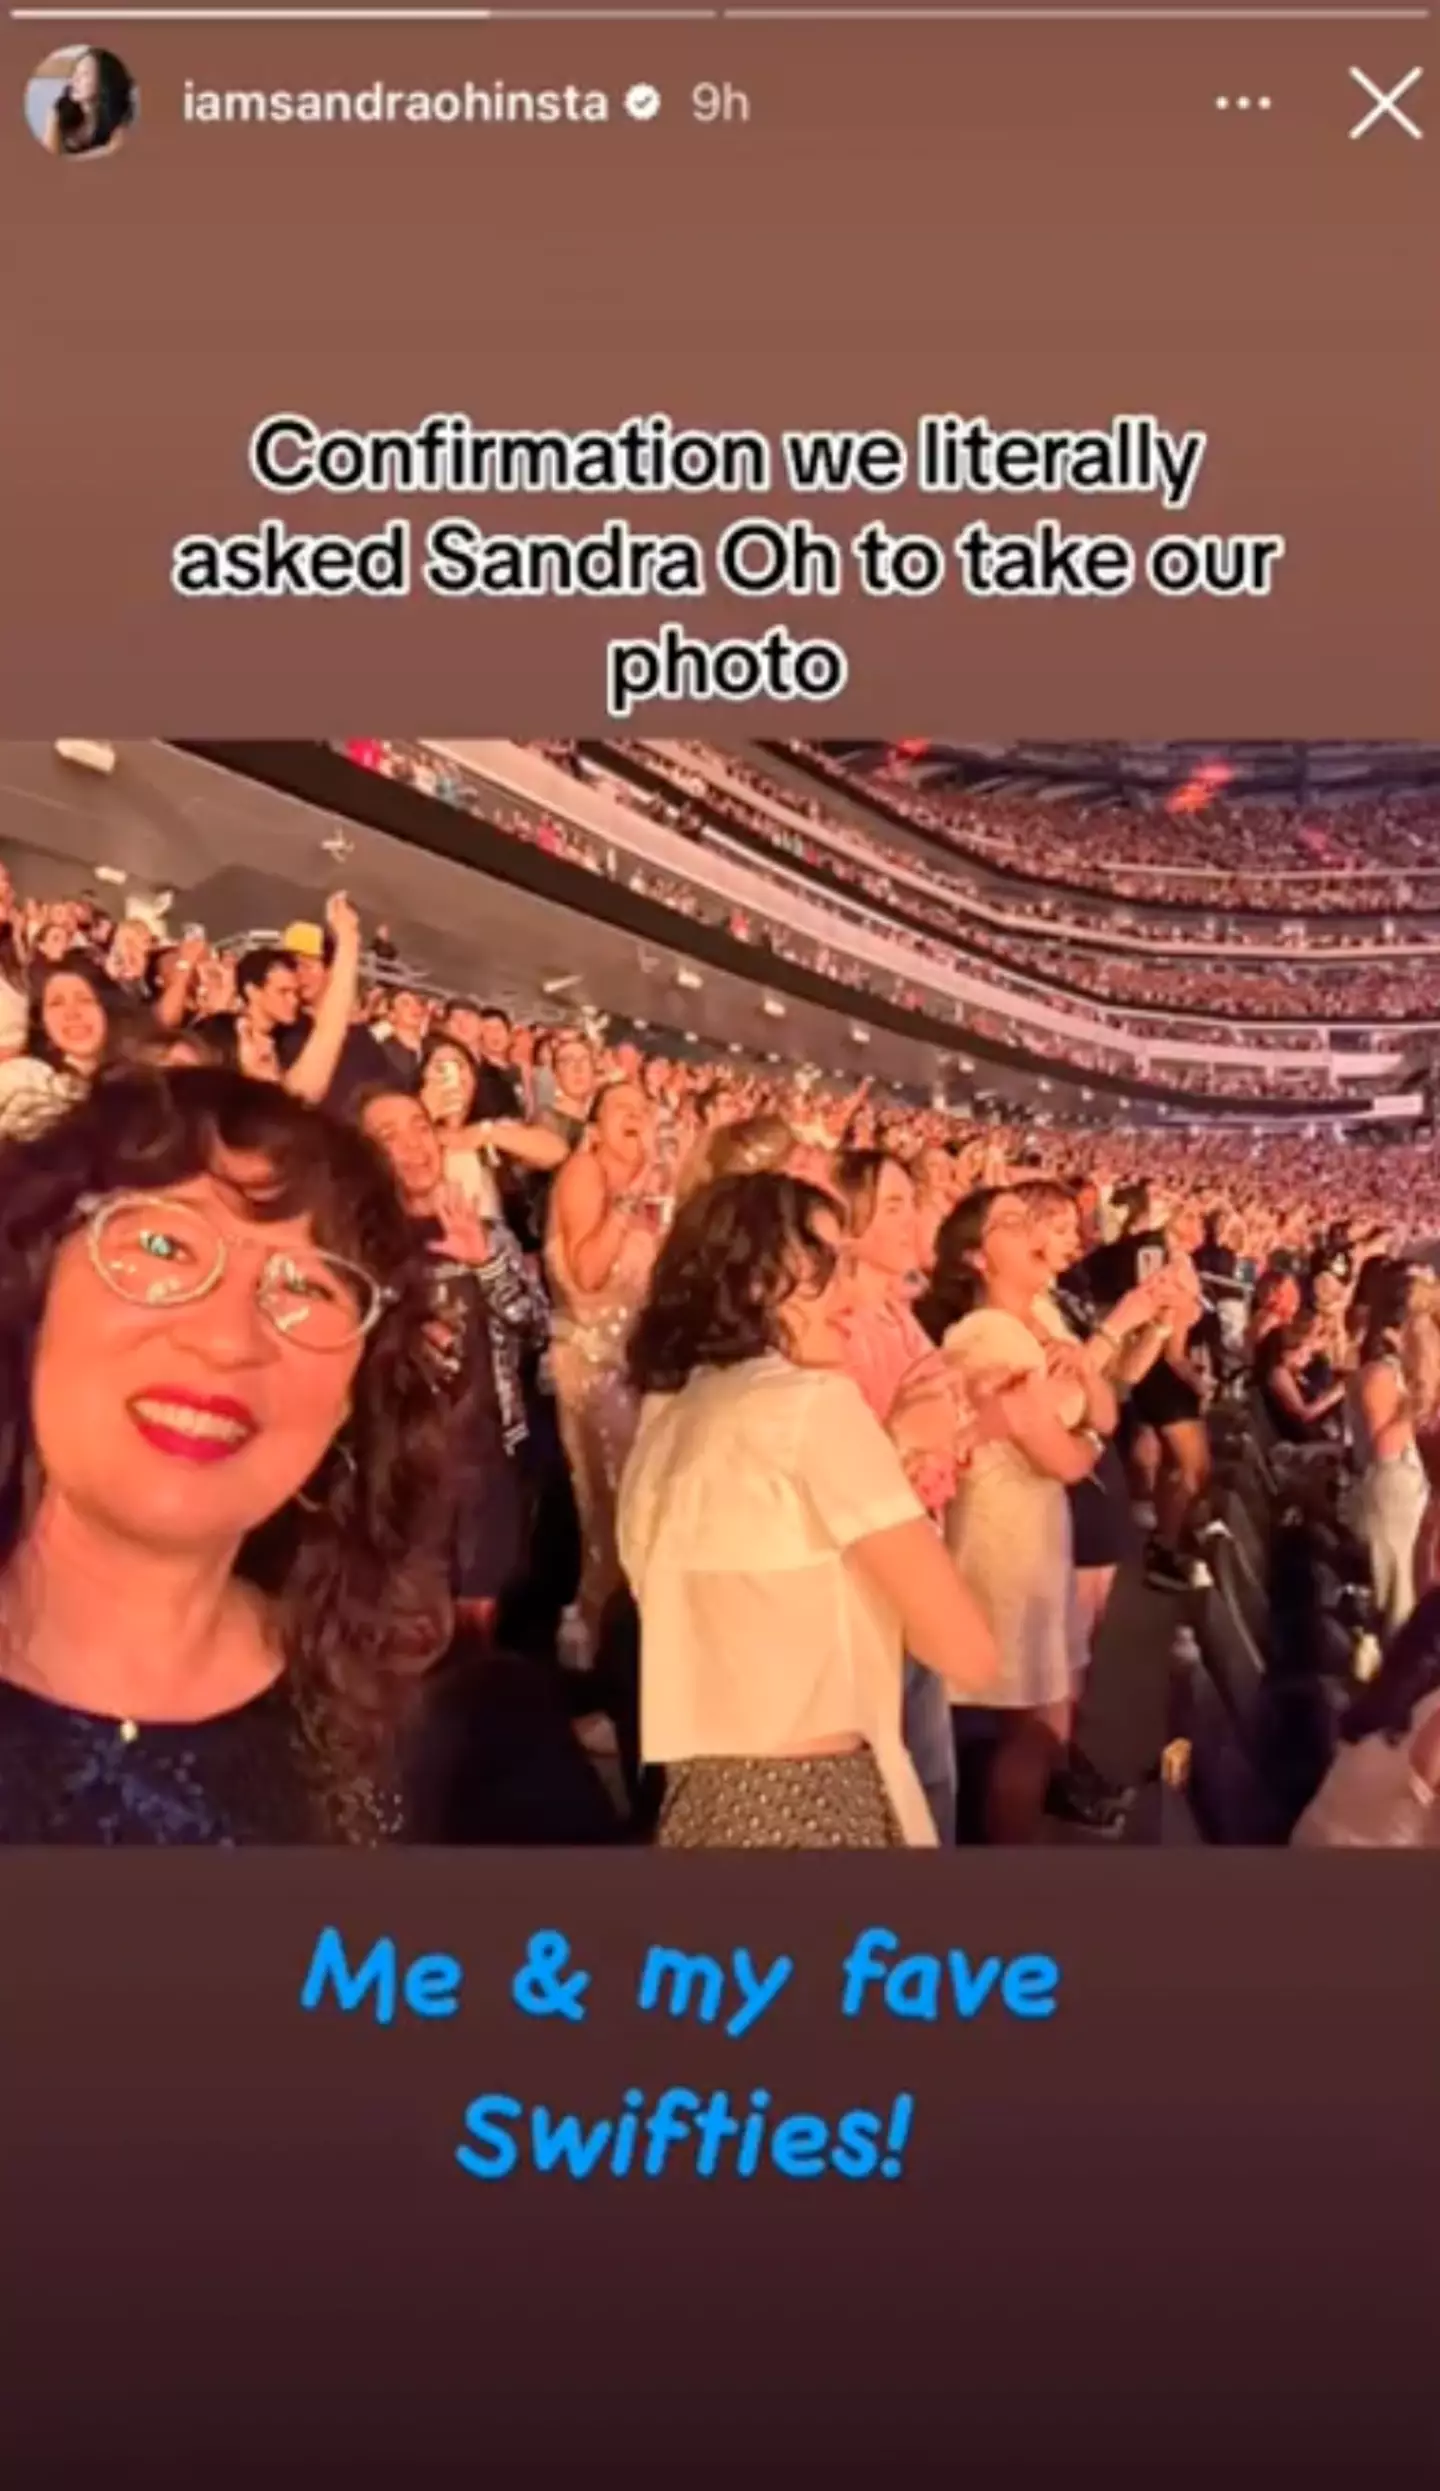 Sandra Oh shared a snap of herself at the concert.